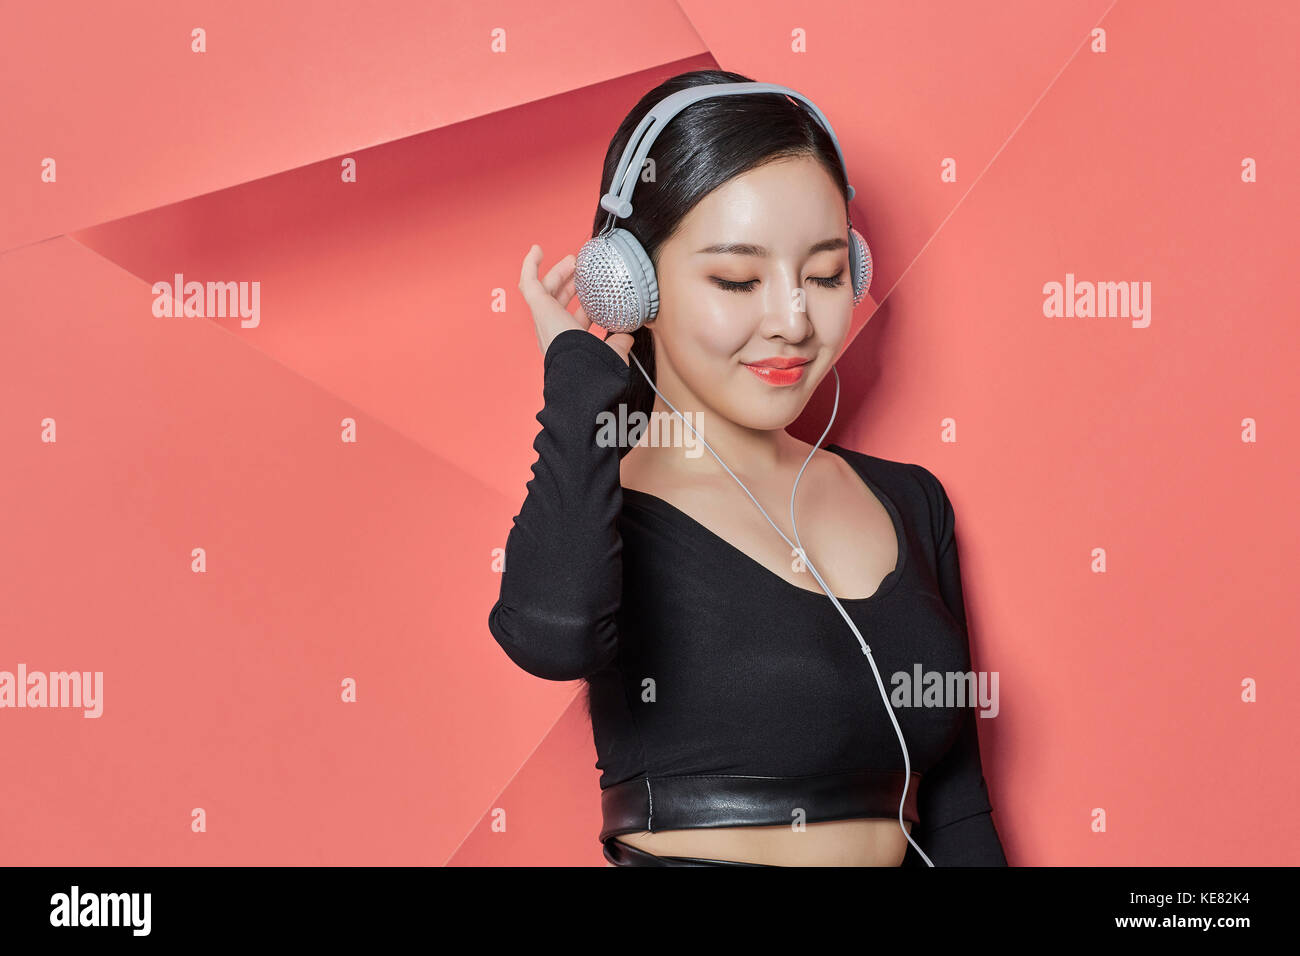 Portrait of young smiling woman listening to music Banque D'Images